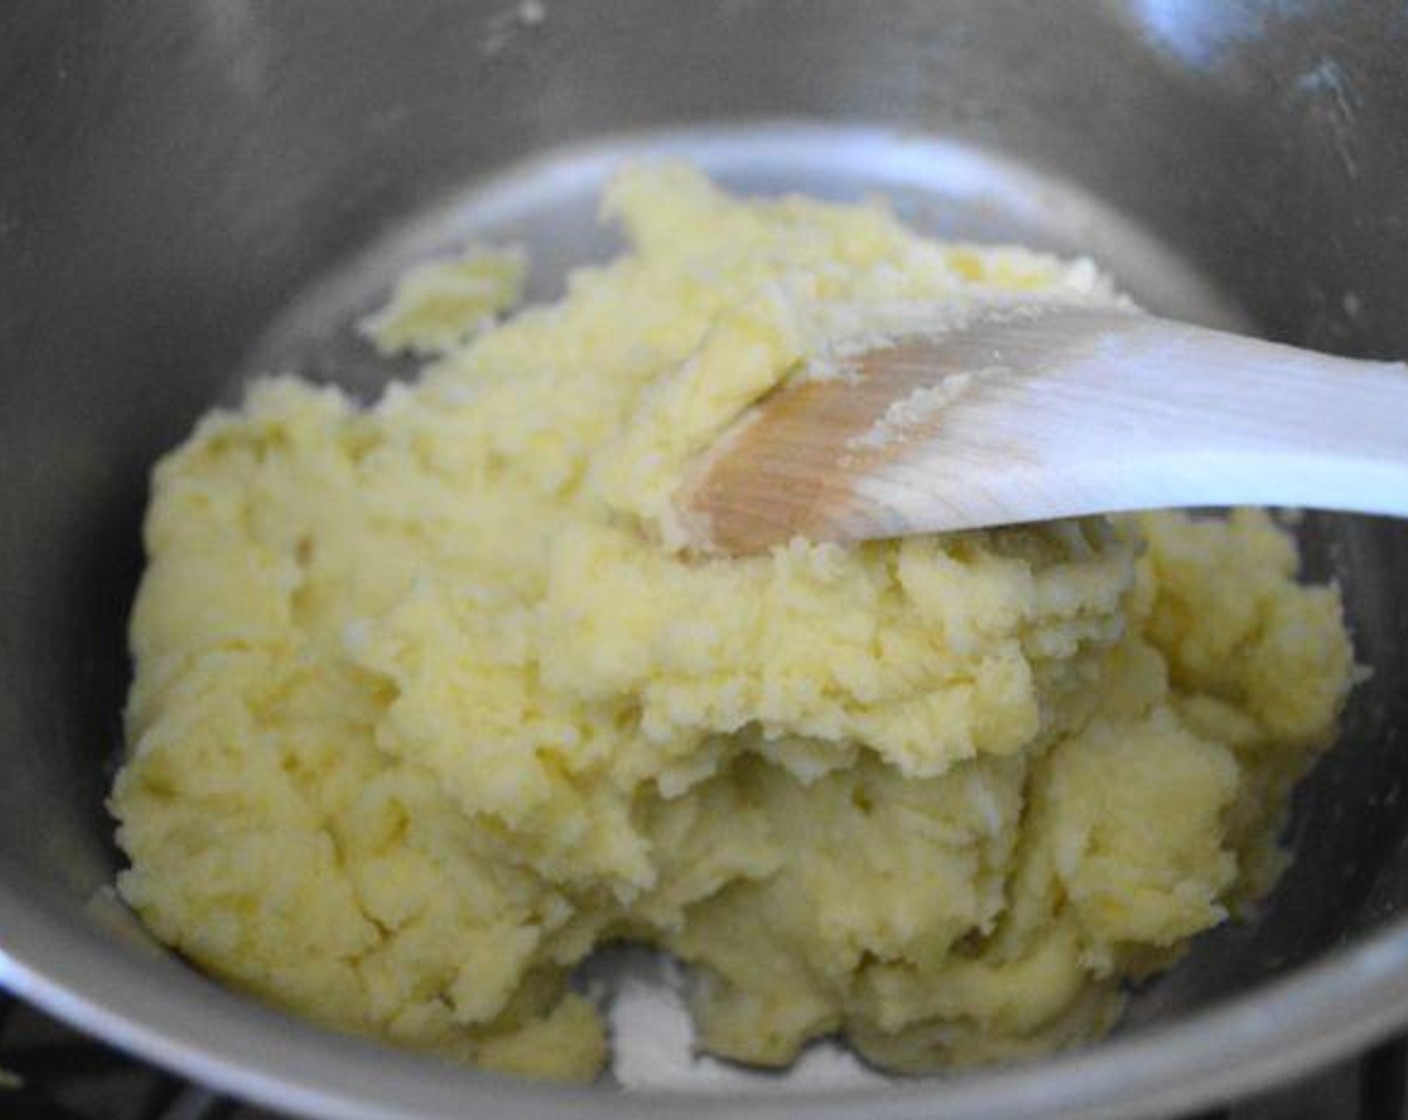 step 4 Lightly mash the garlic cloves into the potatoes, they should just melt right in. Then give it all a big stir until the potatoes are fluffy and creamy. Taste for salt and add another pinch or two until it is to your taste.